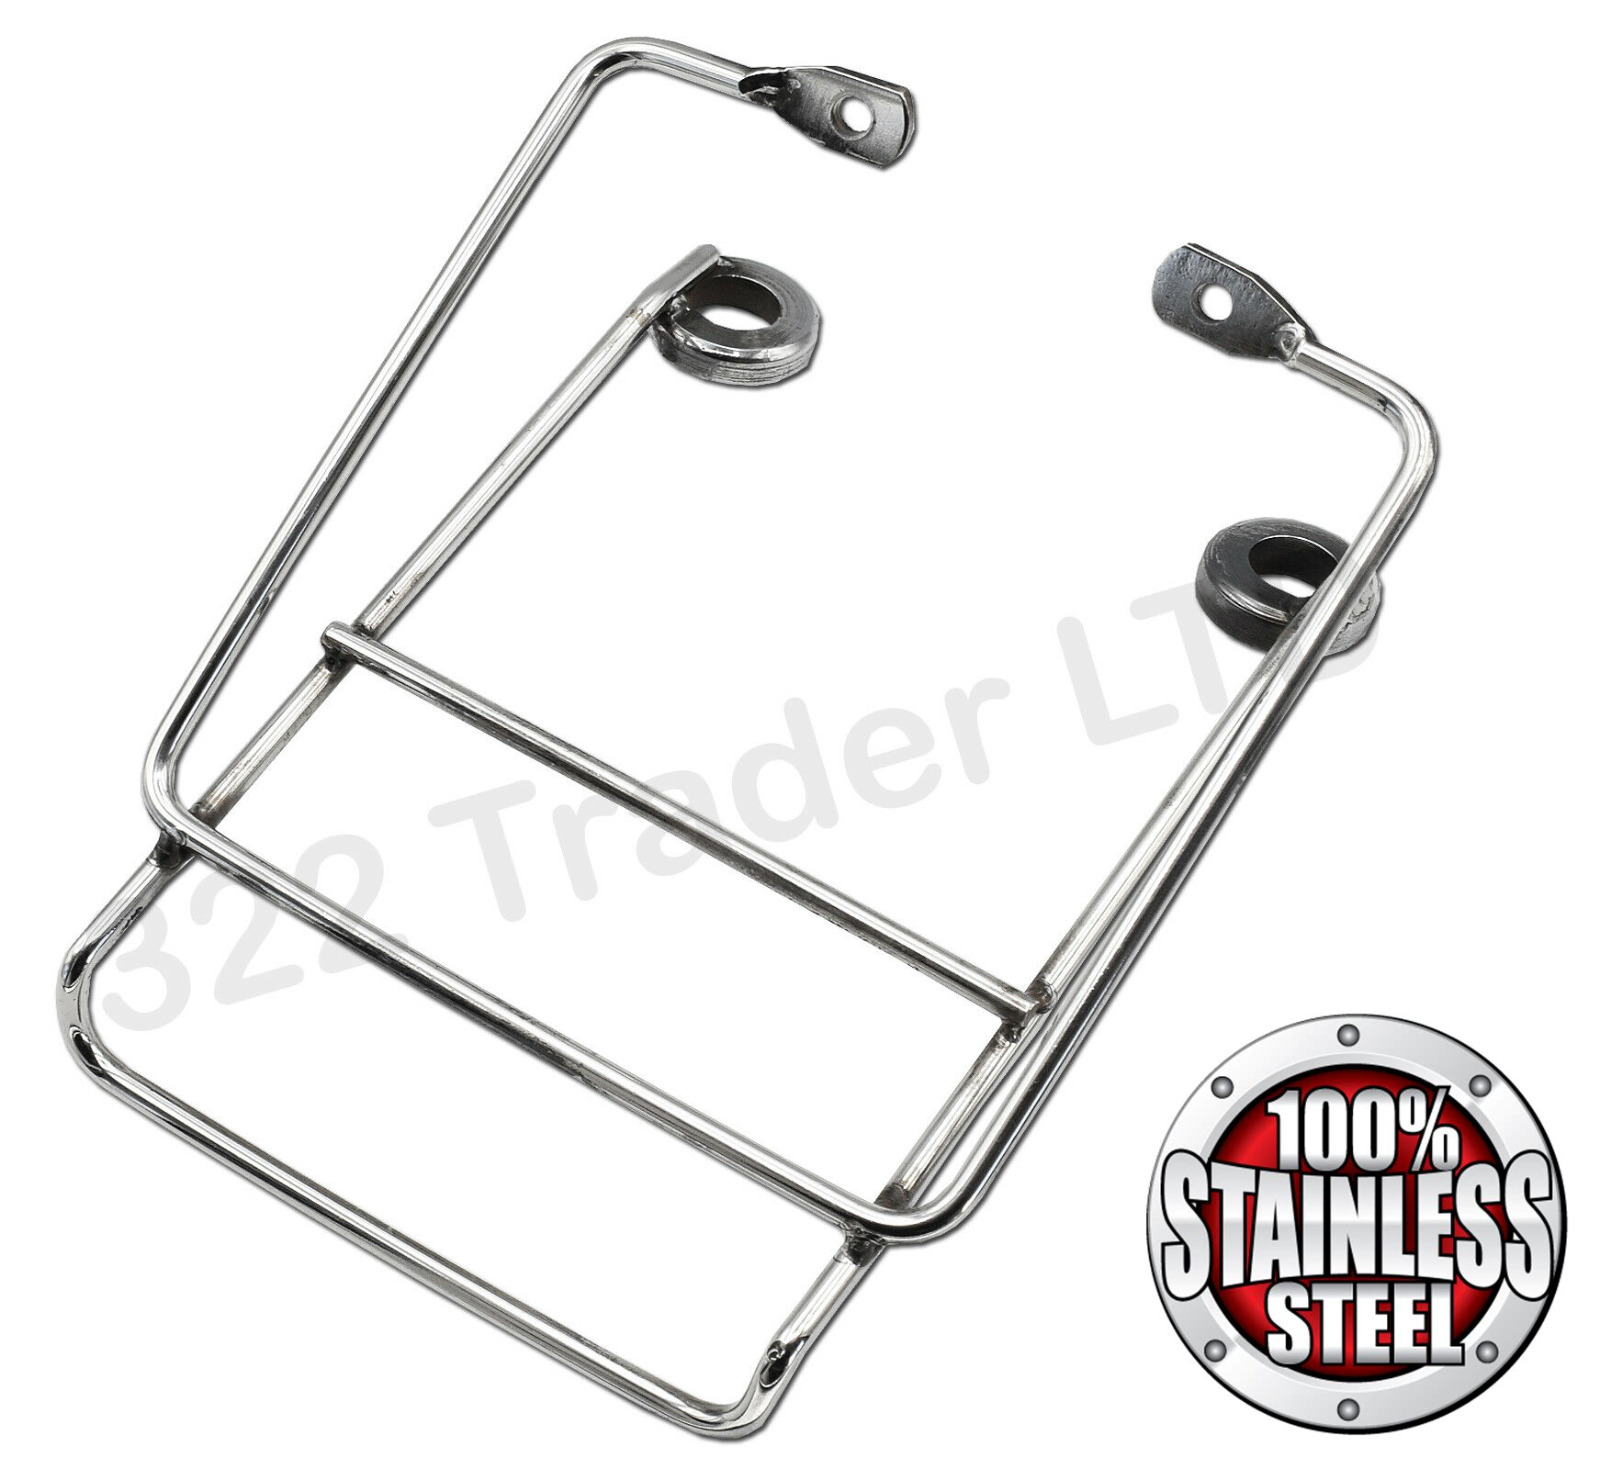 Raleigh Chopper MK2 Rear Rack/Carrier - Stainless Steel - Reproduction 